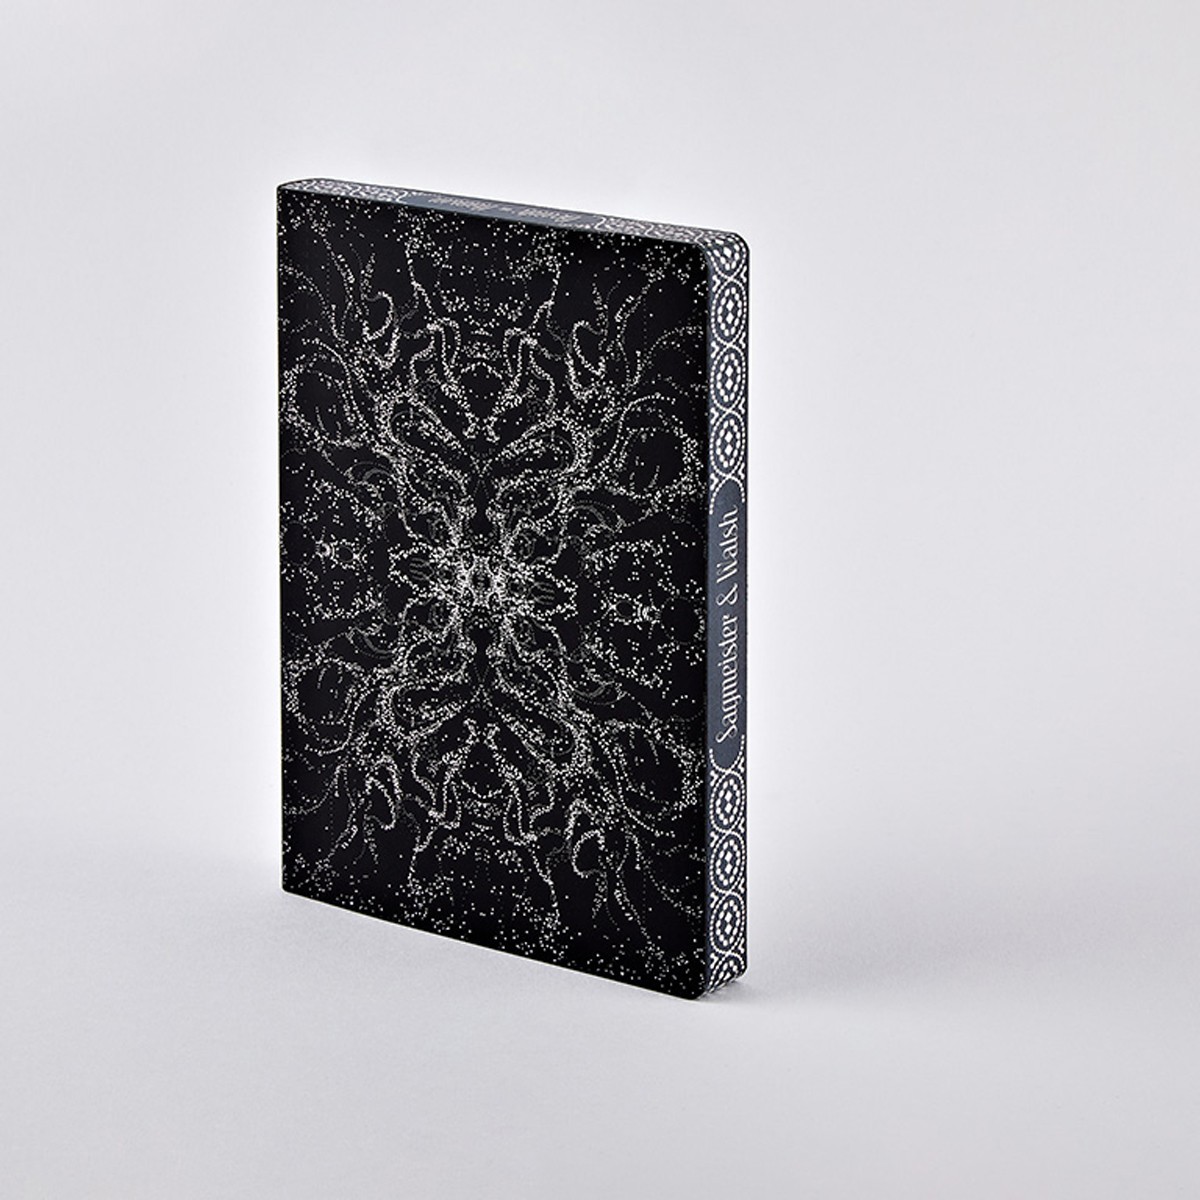 Nuuna Notebook Graphic L - BEAUTY BY SAGMEISTER & WALSH